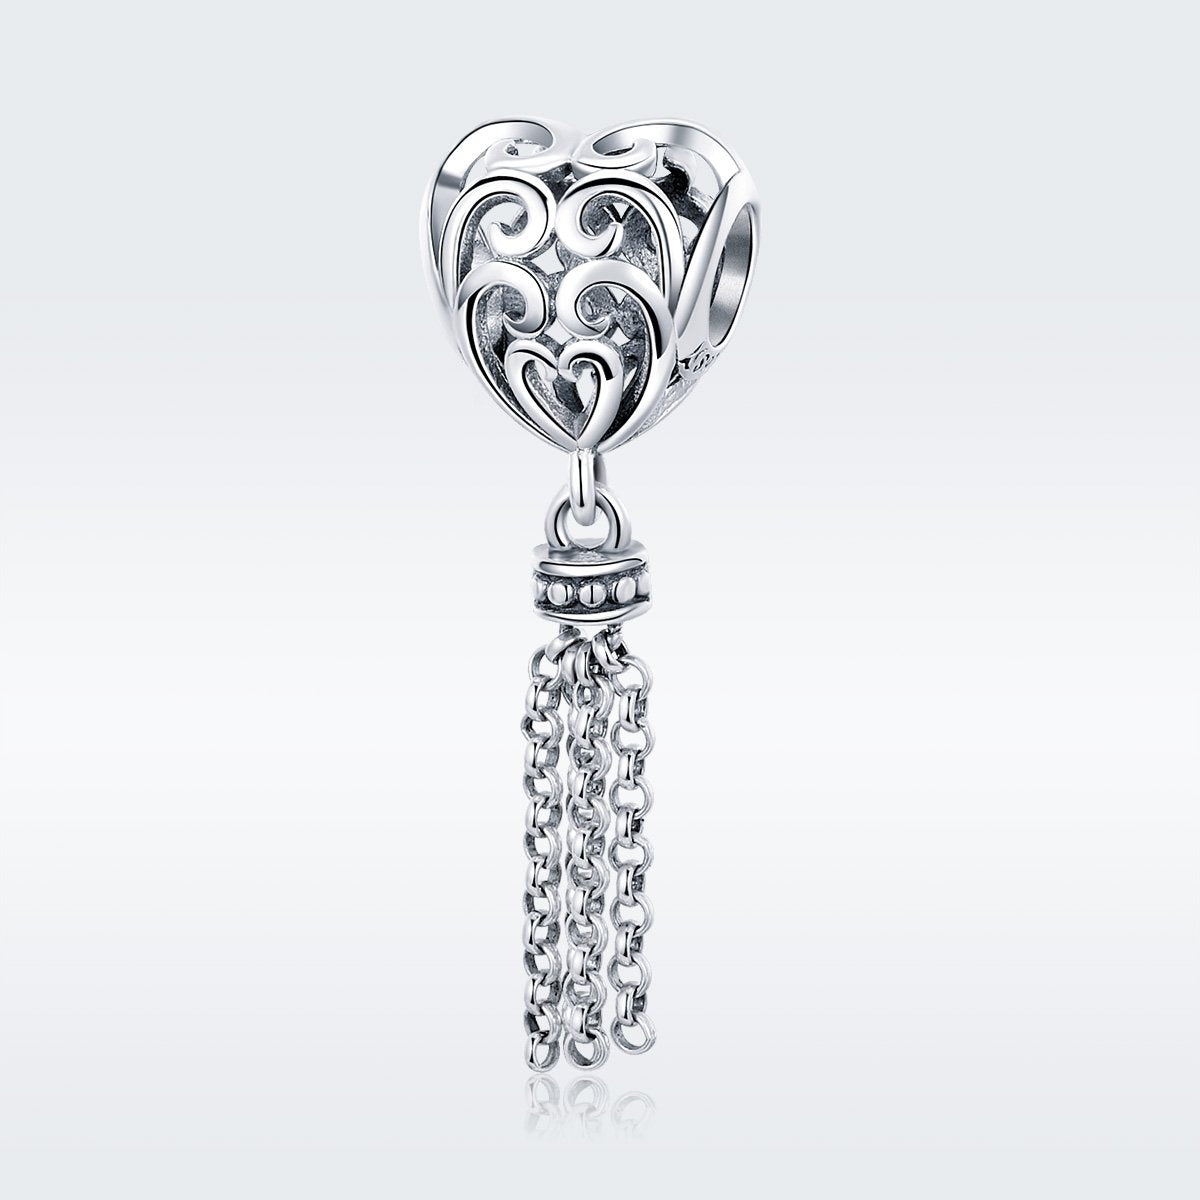 Sterling 925 silver charm the dangling heart in hand fits Pandora charm and European charm bracelet Xaxe.com